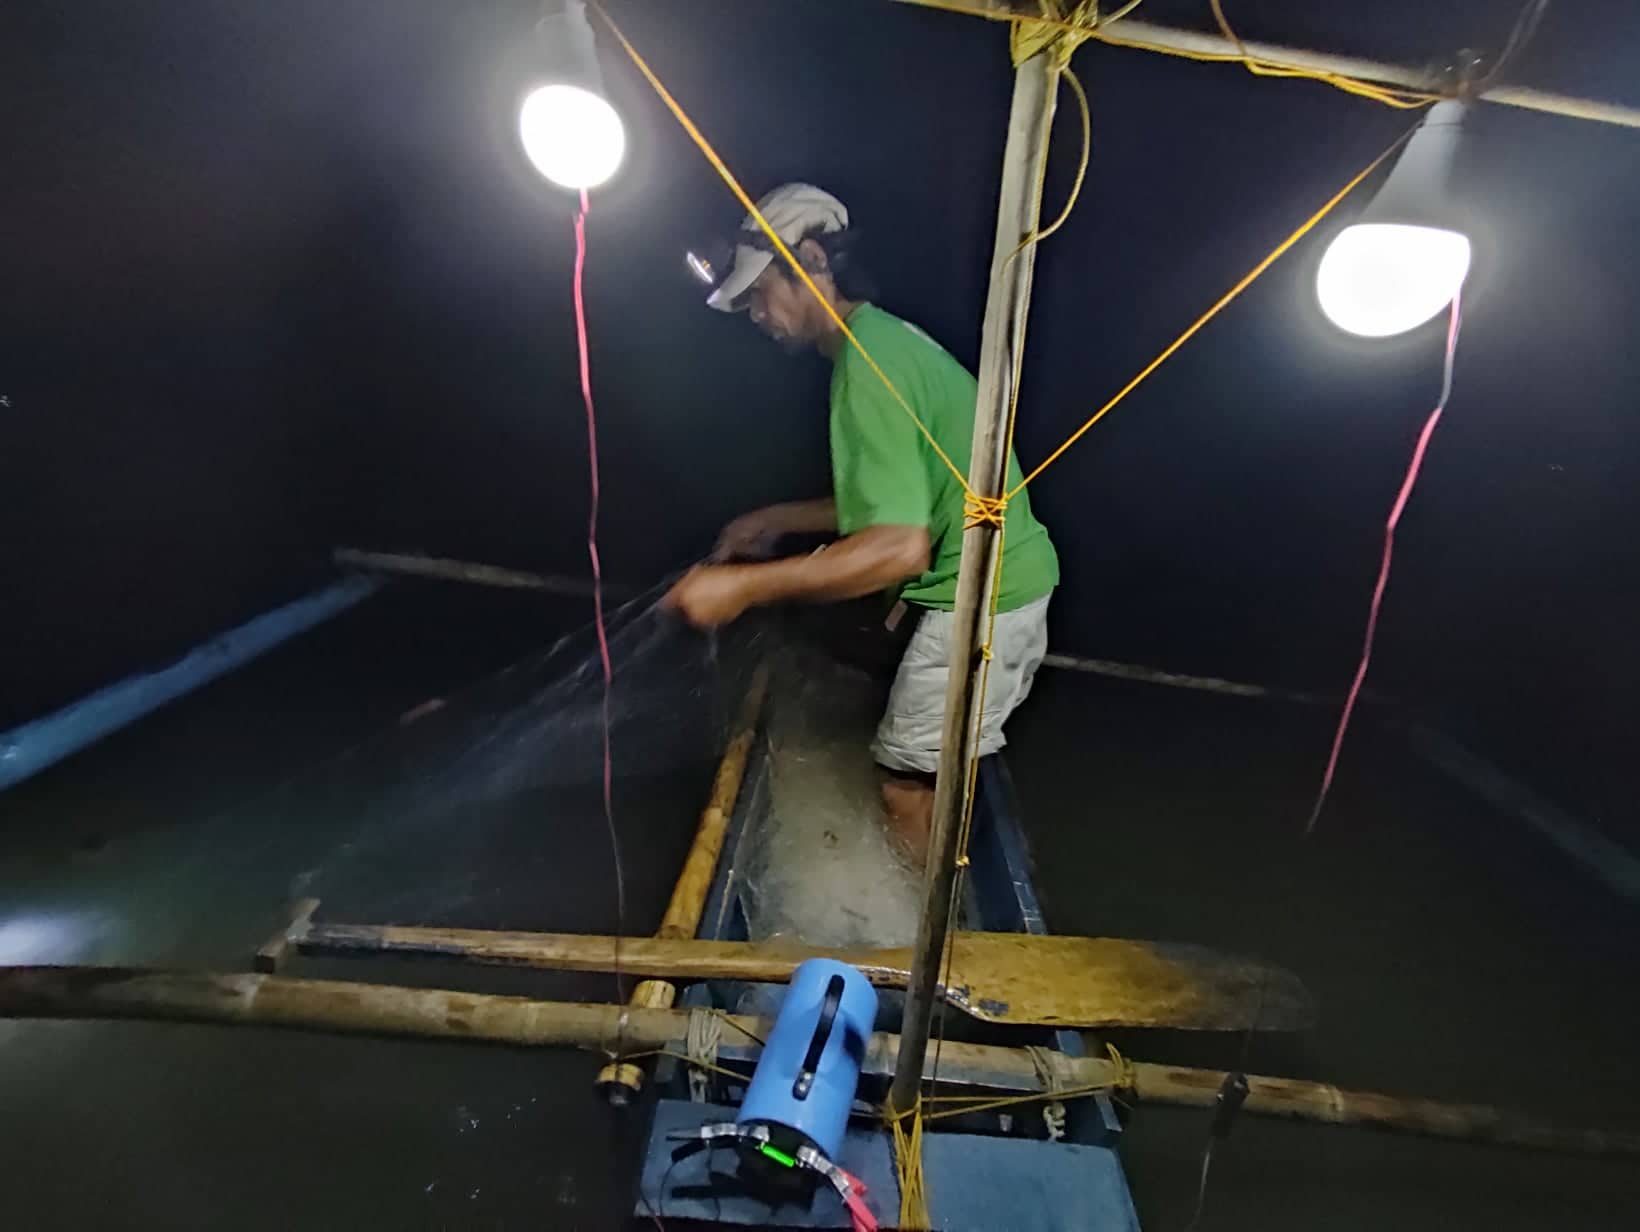 Inventors want fishermen to benefit from green technology